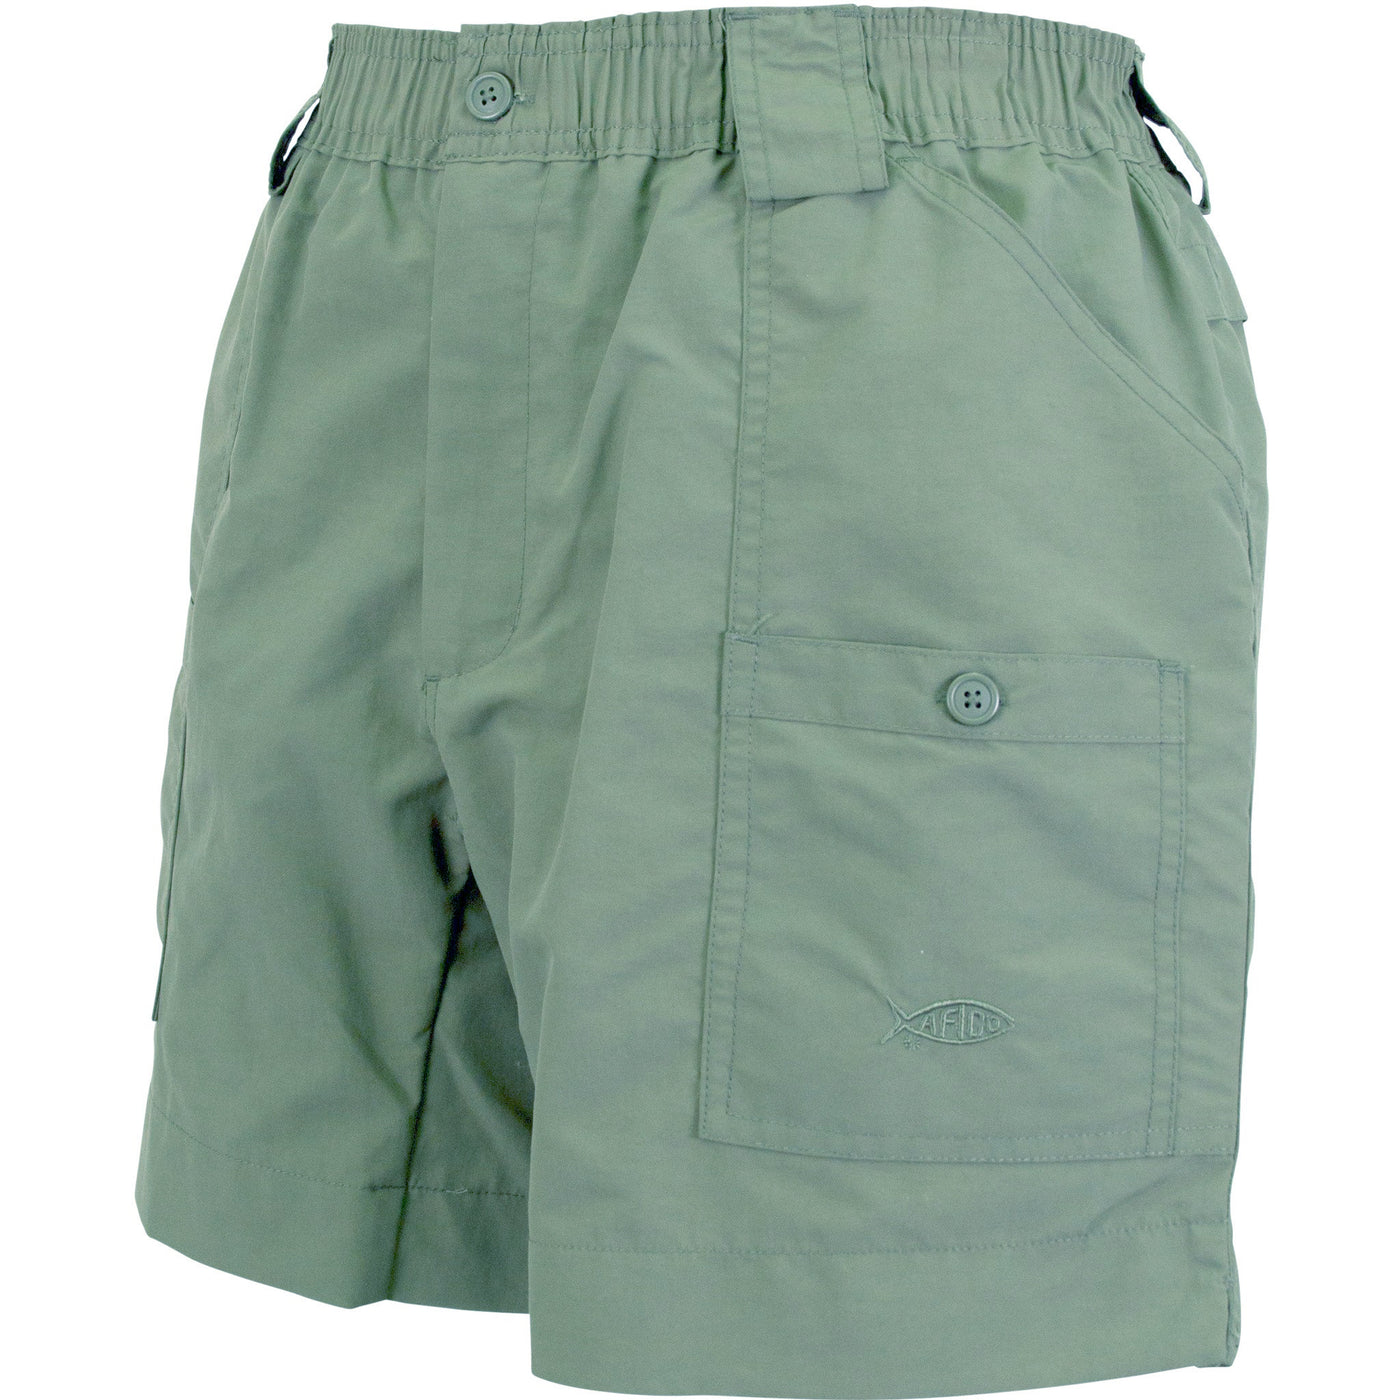 AFTCO Original Fishing Shorts 6"-MENS CLOTHING-Cactus-28-Kevin's Fine Outdoor Gear & Apparel